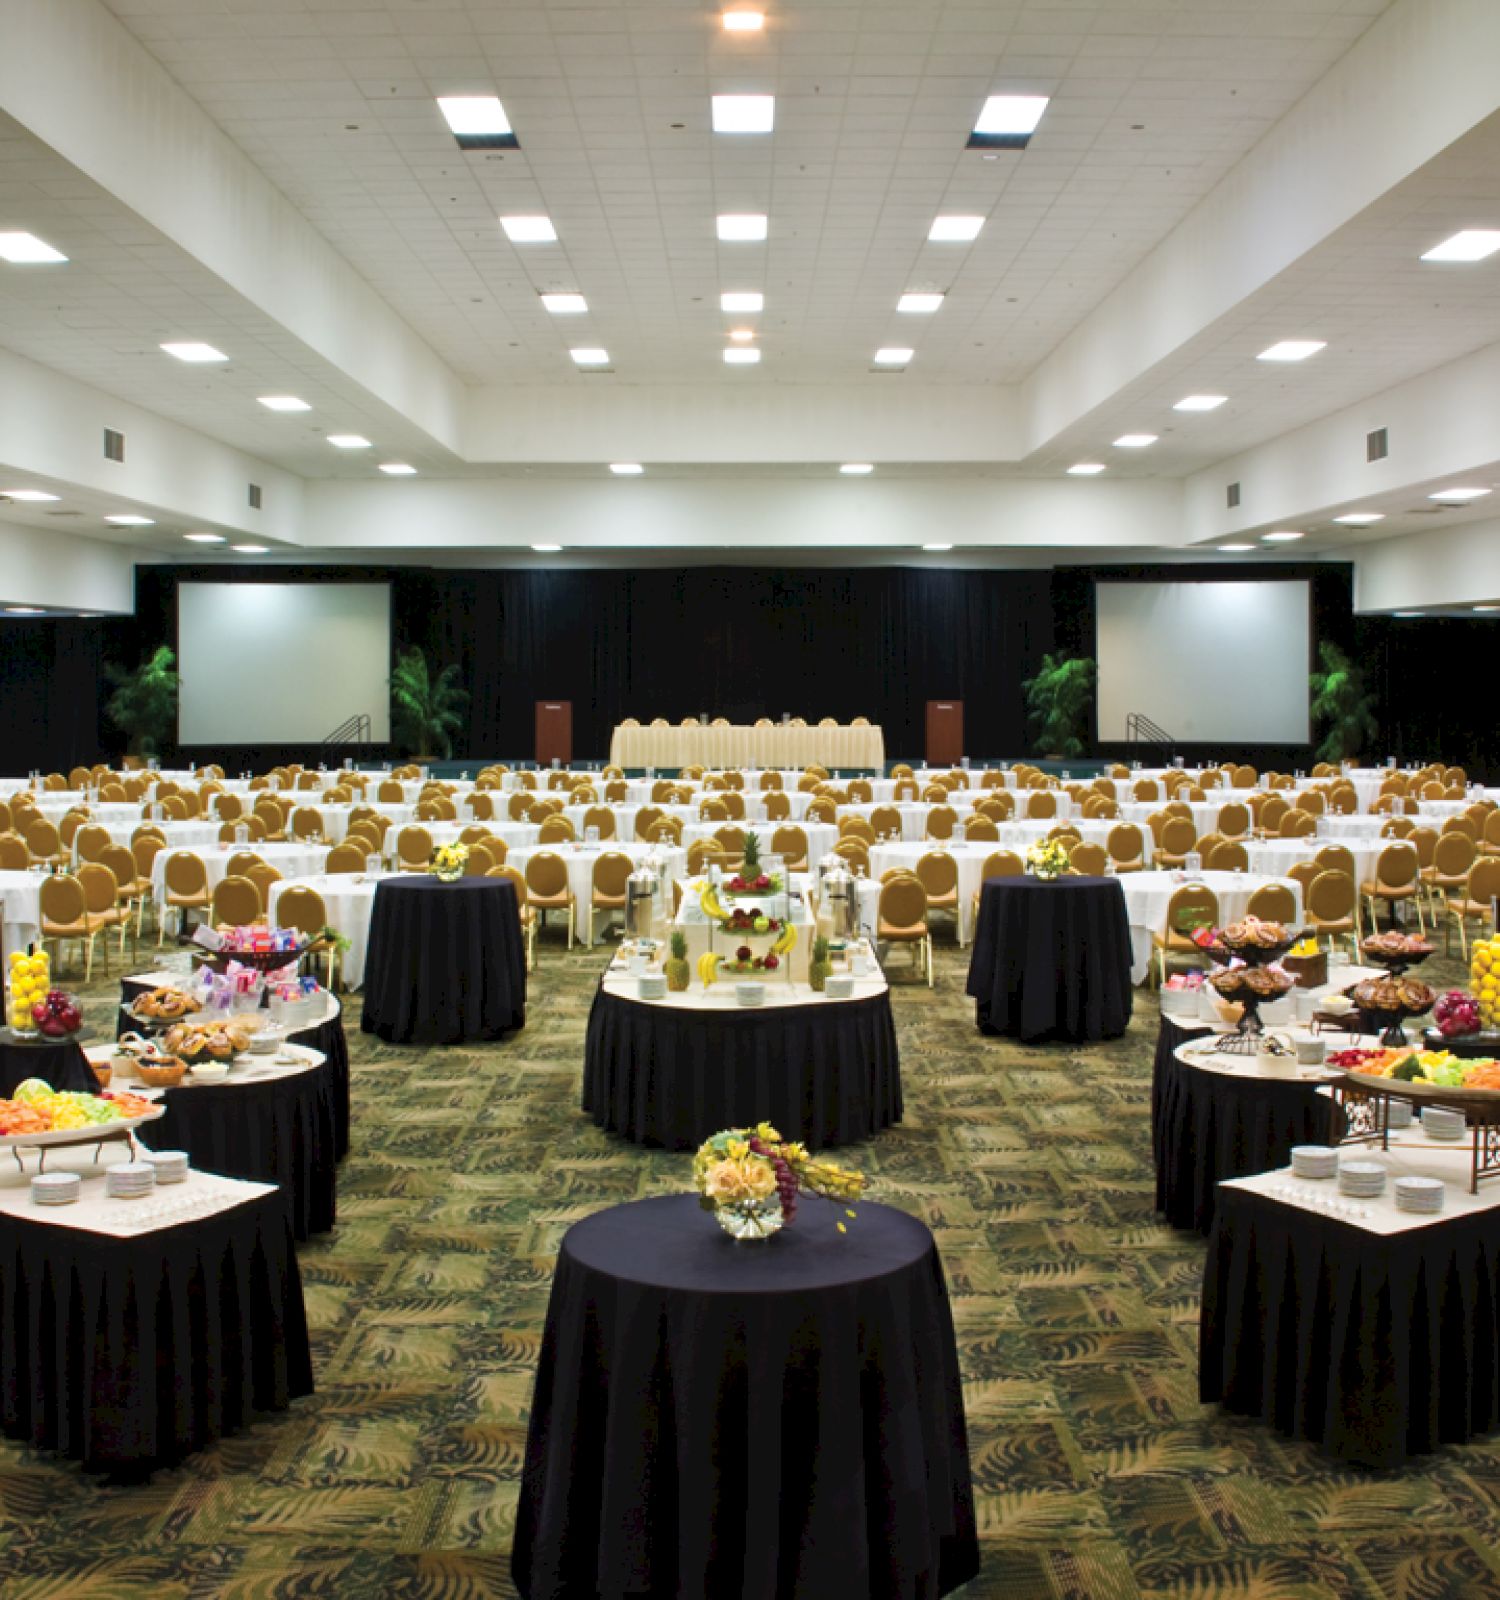 The image shows a large conference hall set up with round tables covered in black and yellow tablecloths, and food platters placed on some of them.